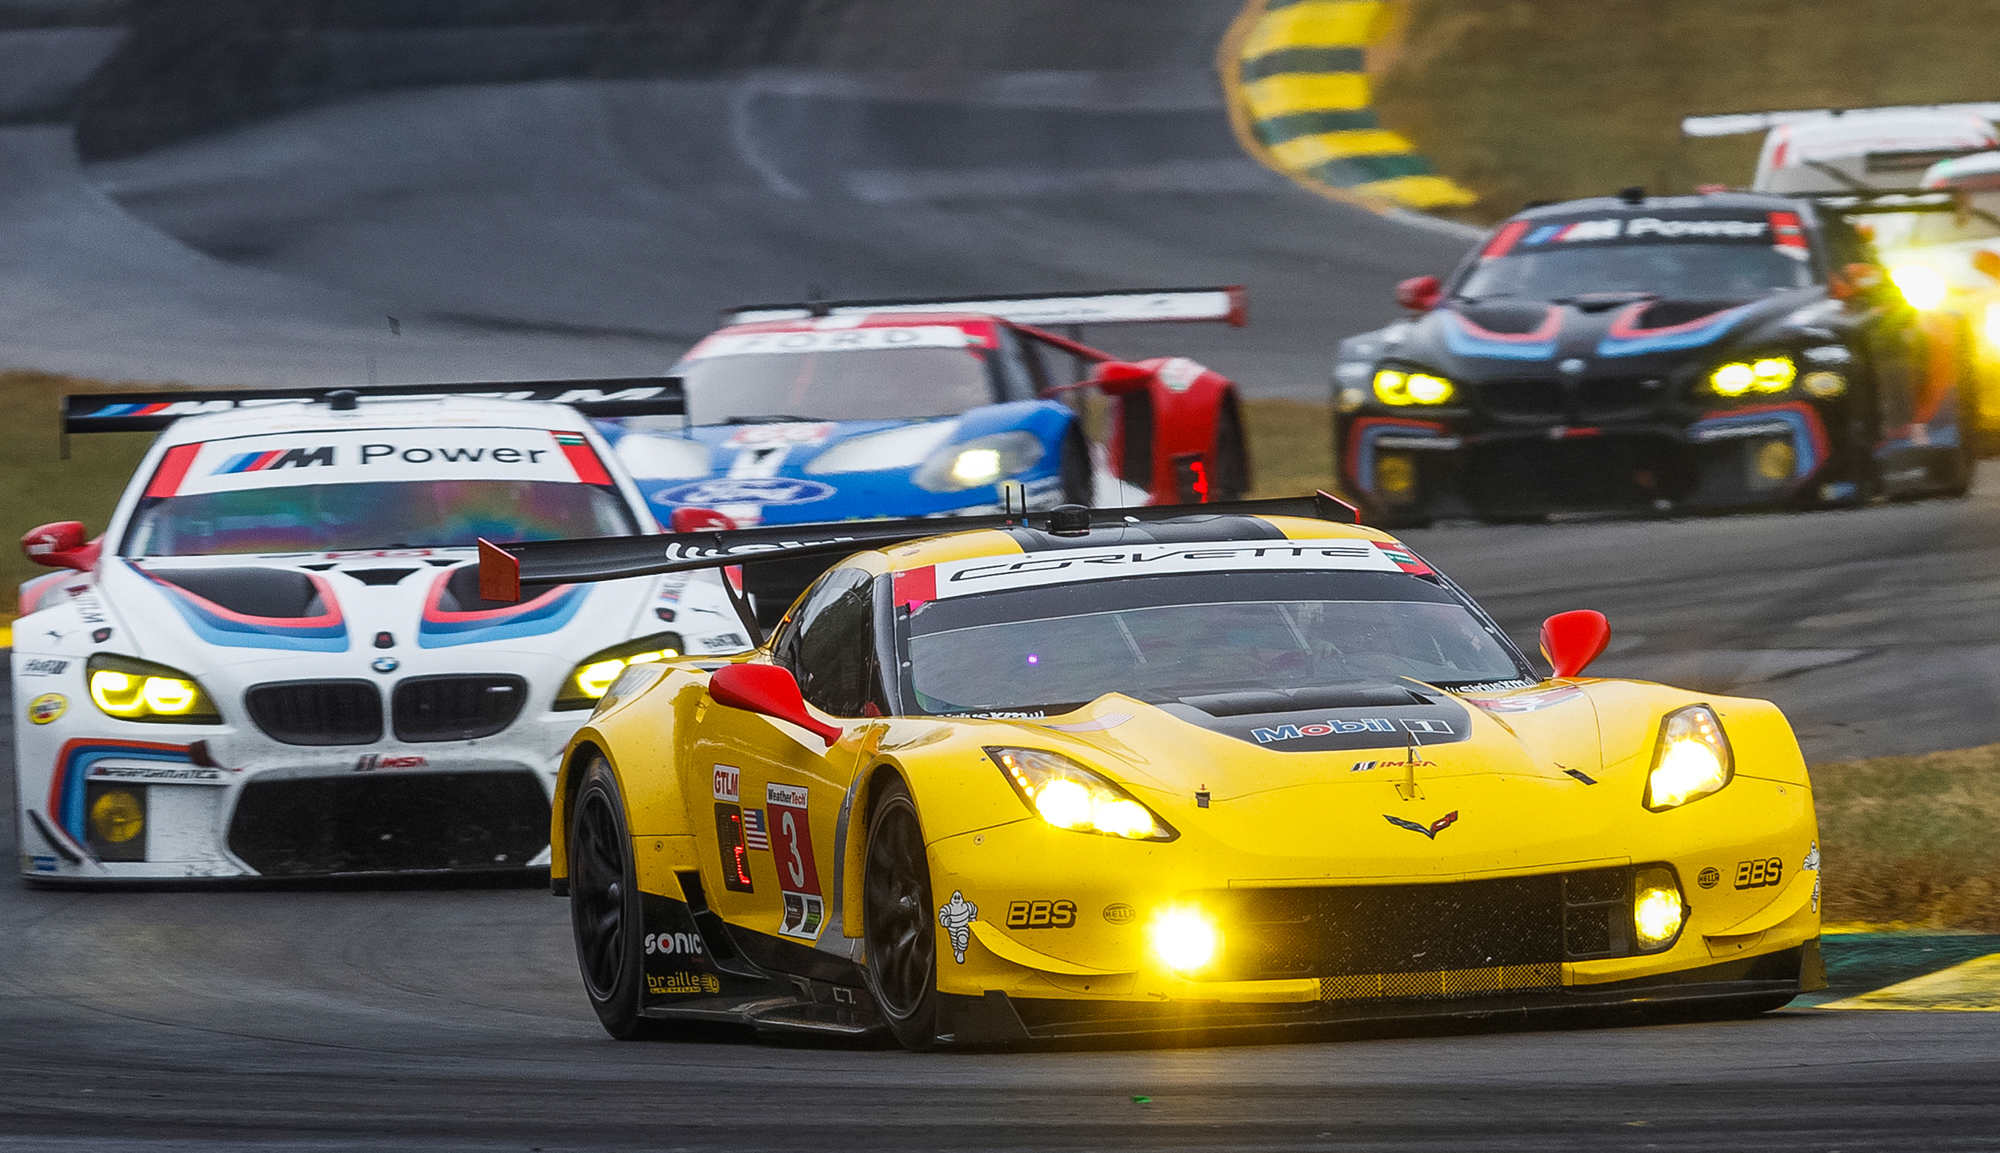 The bucket of bolts front engine Corvette keeps beating those rear-engine GTLM competitors